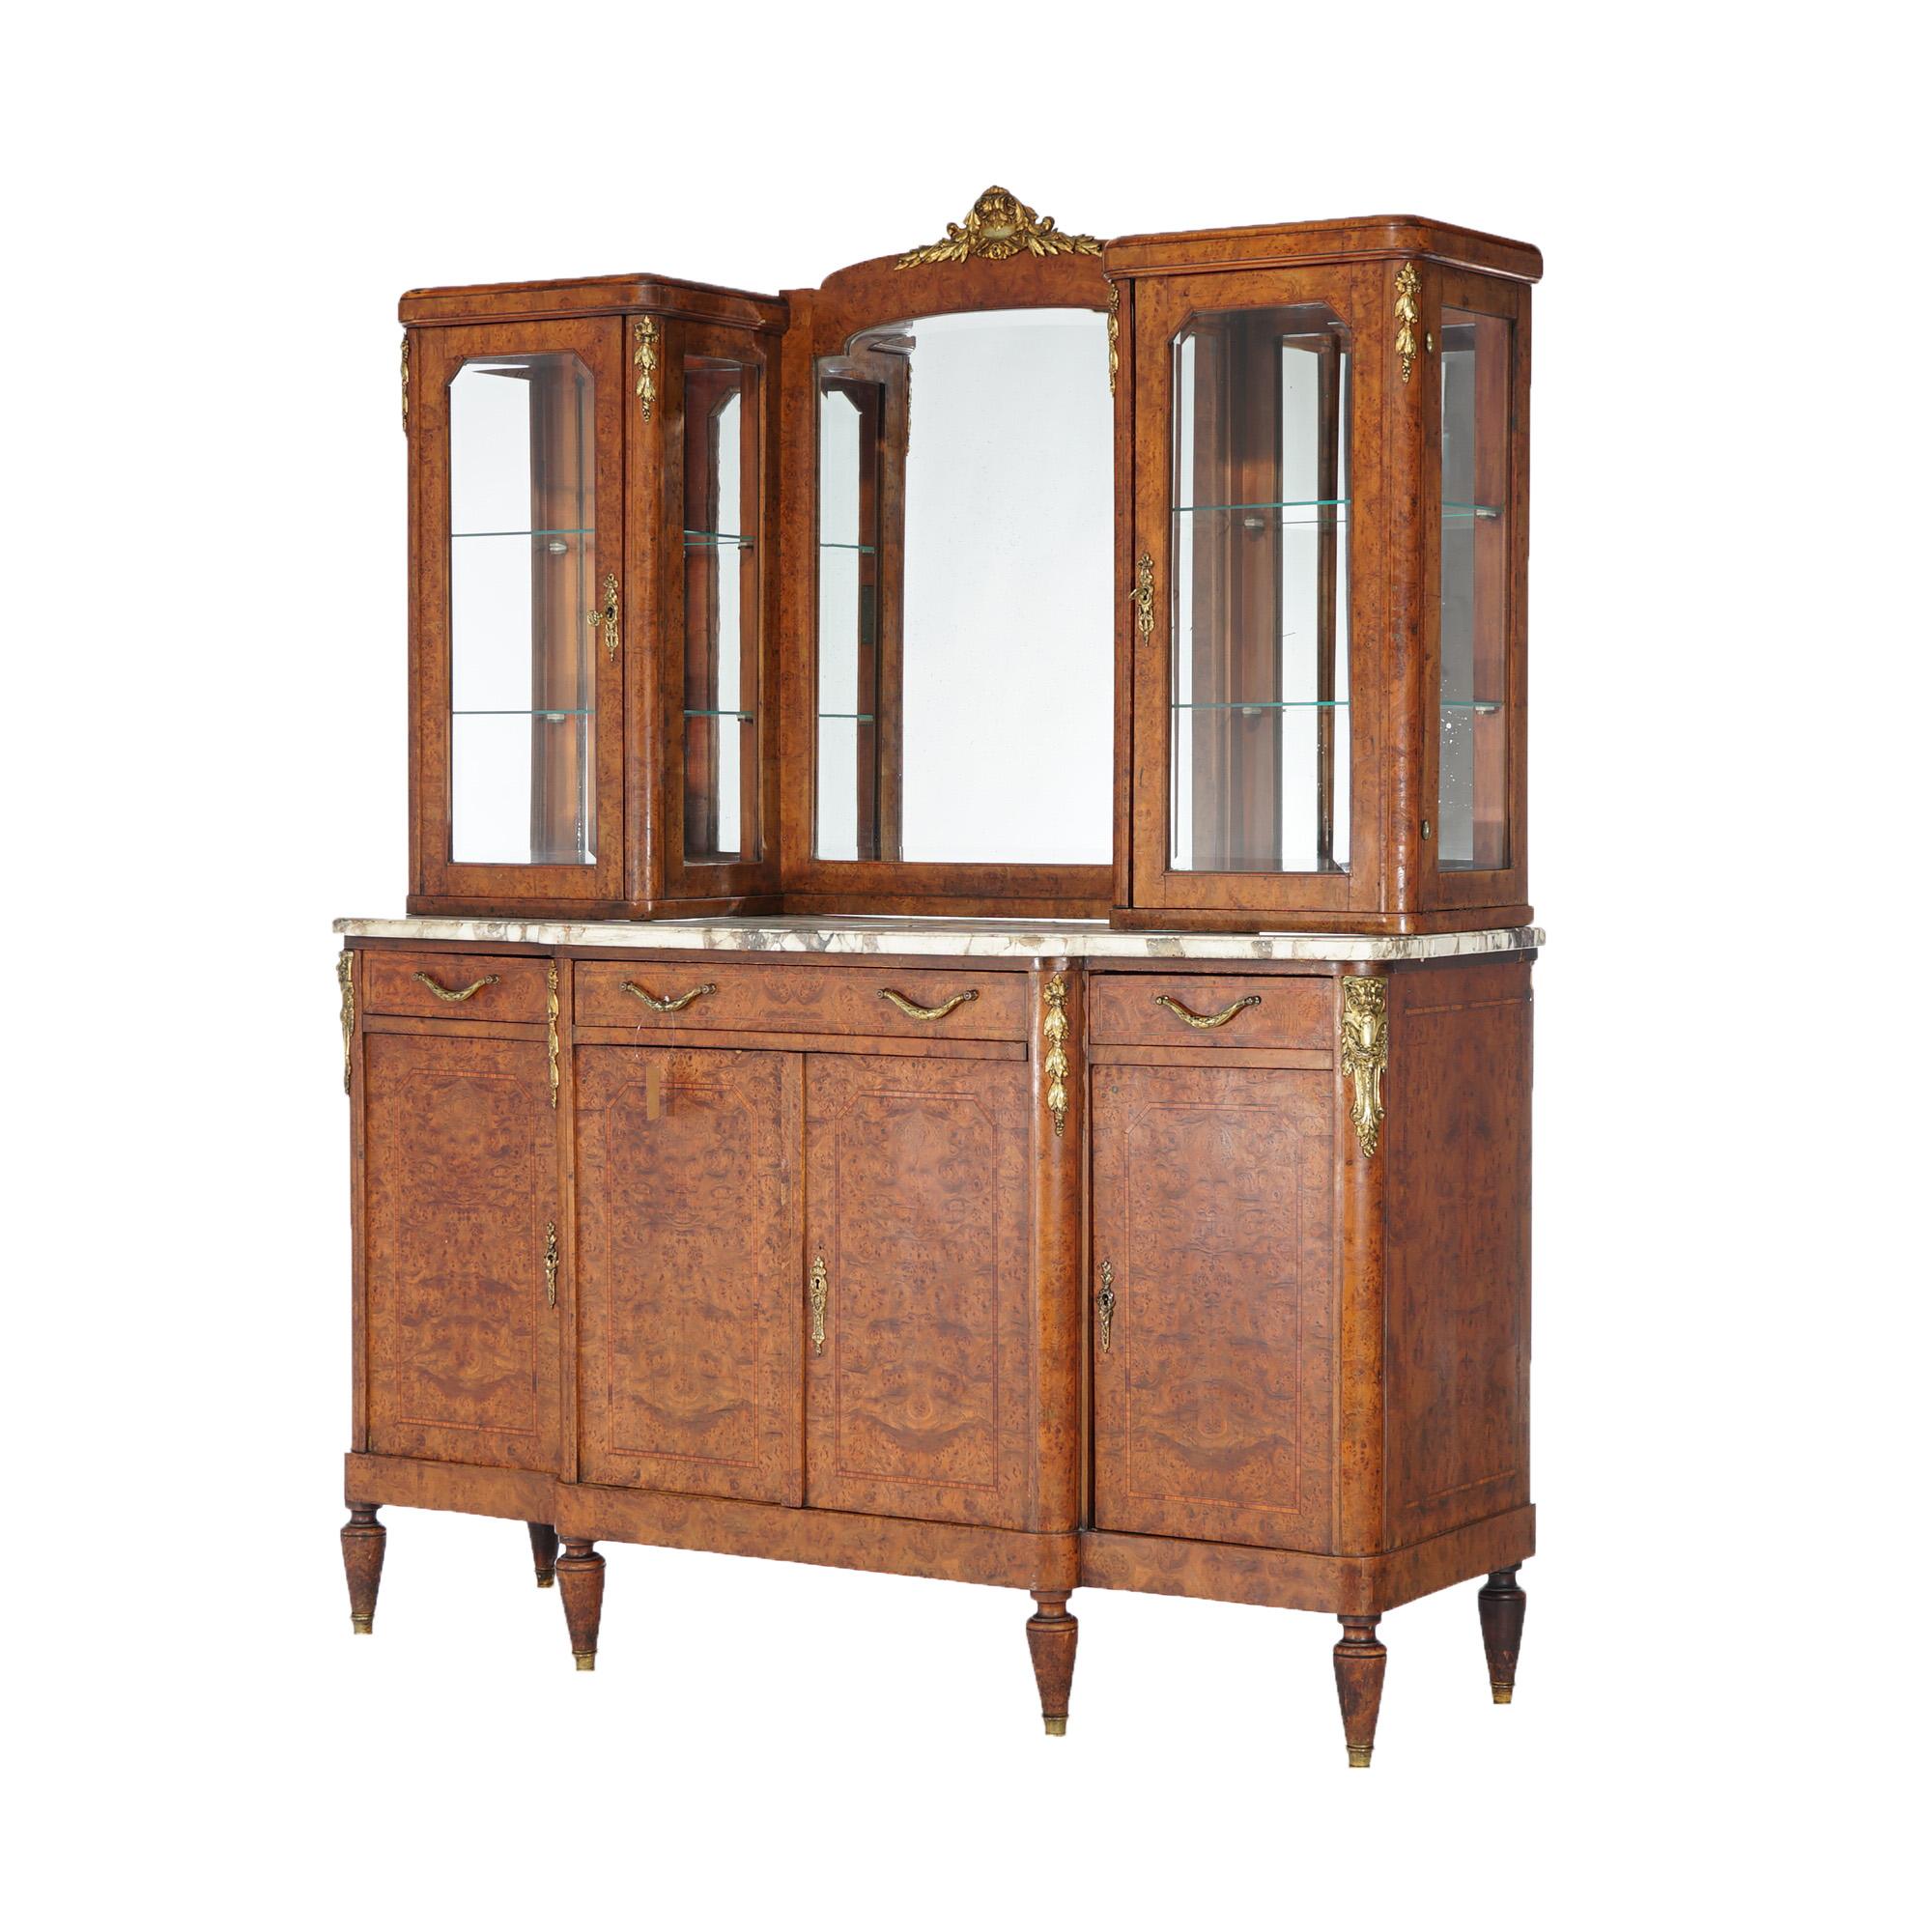 An antique French style buffet offers burl construction with mirrored upper having flanking glass display cabinets over marble base with lower blind door cabinets, inlaid banding and gilt cast mounts throughout, raised on tapered turned legs,